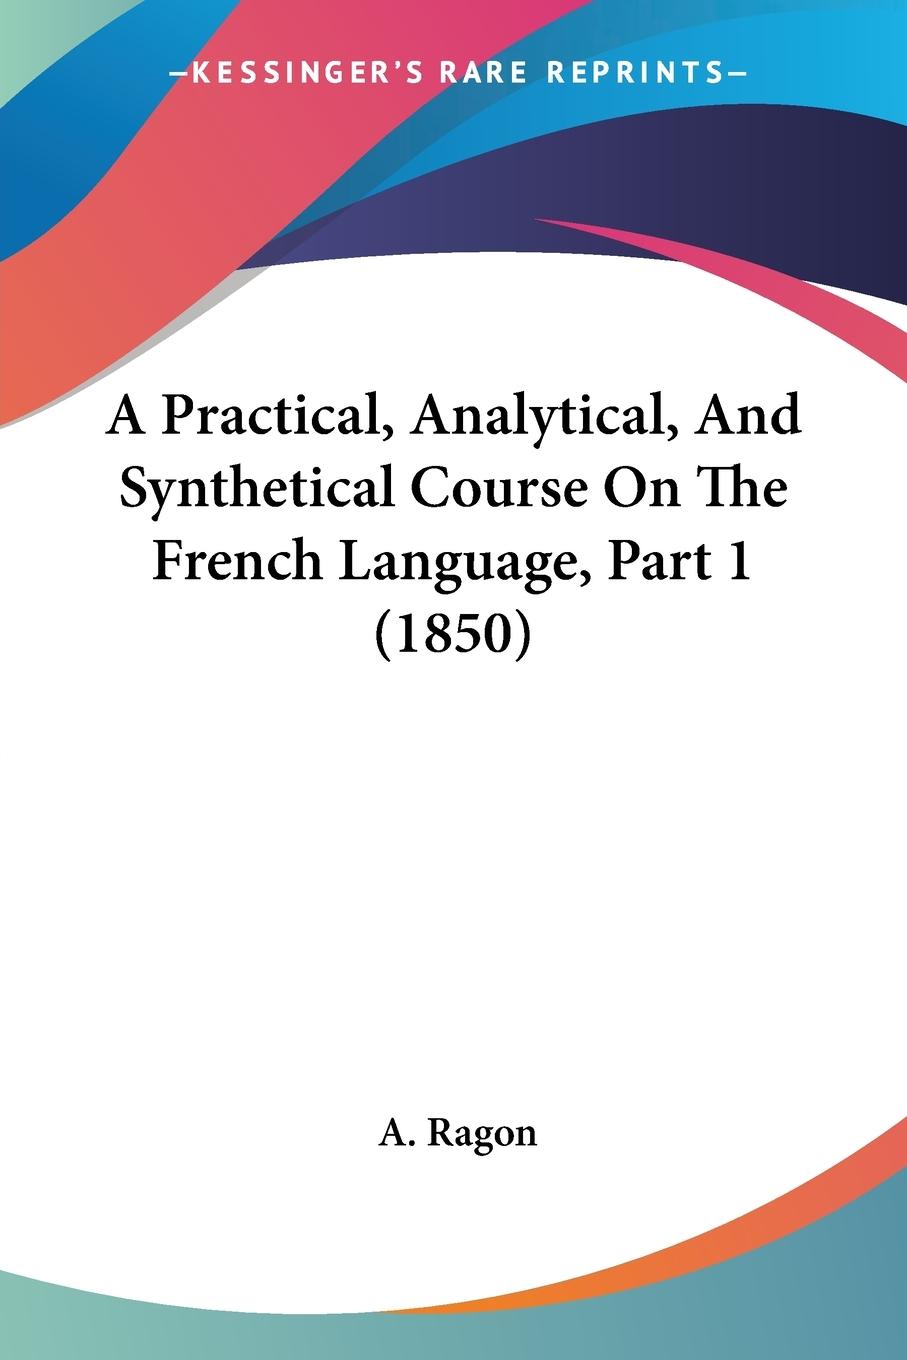 A Practical, Analytical, And Synthetical Course On The French Language, Part 1 (1850) - Ragon, A.